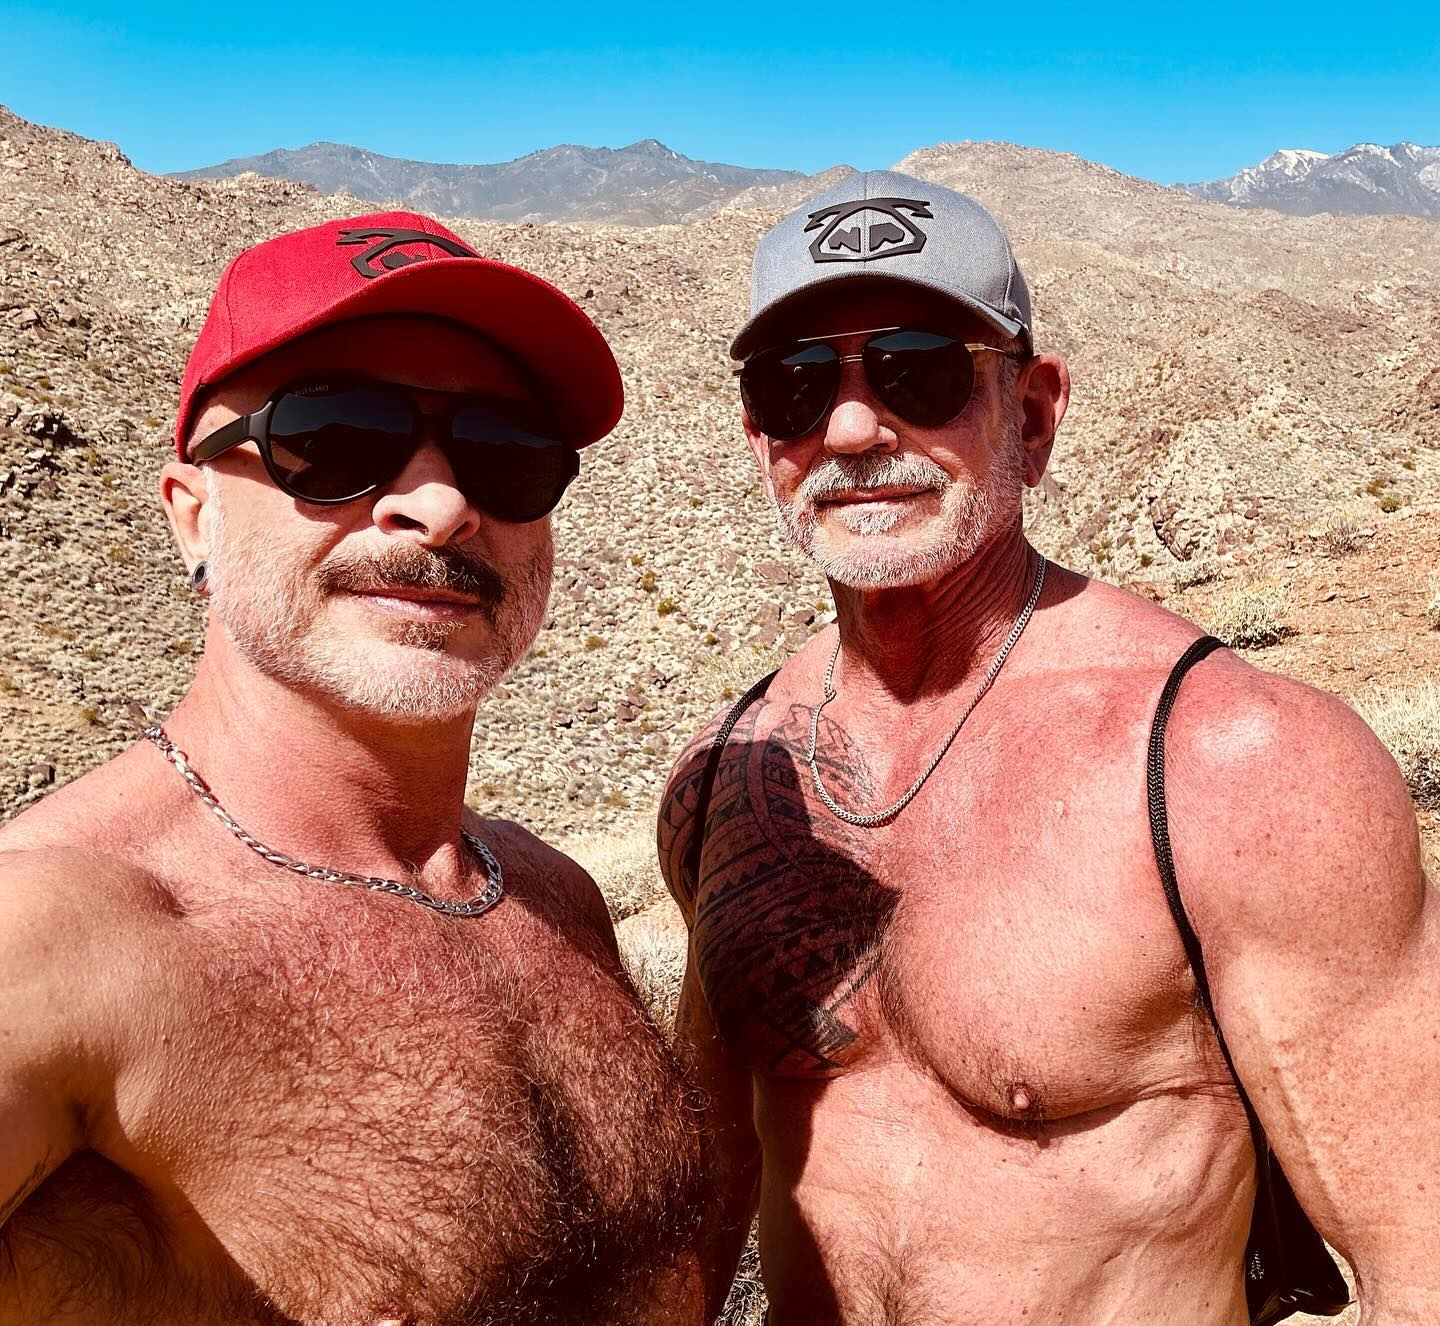 Beautiful morning hike through and above Palm Canyon Trail in Palm Springs. #palmcanyontrail #palmsprings #nature #oasis #mountains #friends #fitness